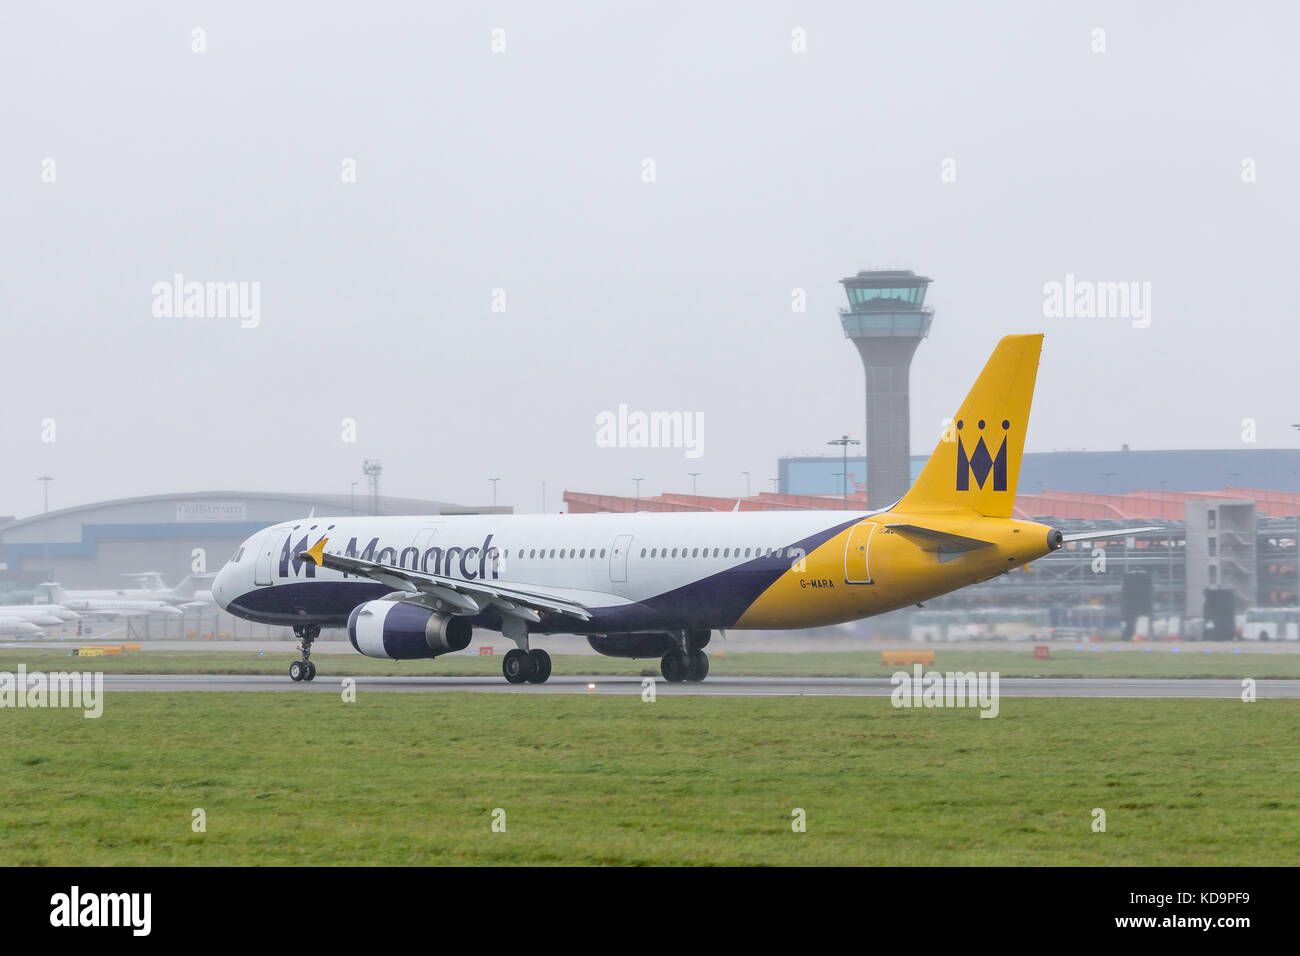 Luton, Bedfordshire, UK. . 11th Oct, 2017. Airbus A321 aircraft, G-MARA, of Monarch Airlines takes off for the last time from Luton on Wednesday 11th October 2017 following the collapse of UK based carrier the previous week on Monday 2nd October 2017. Credit: Nick Whittle/Alamy Live News Stock Photo